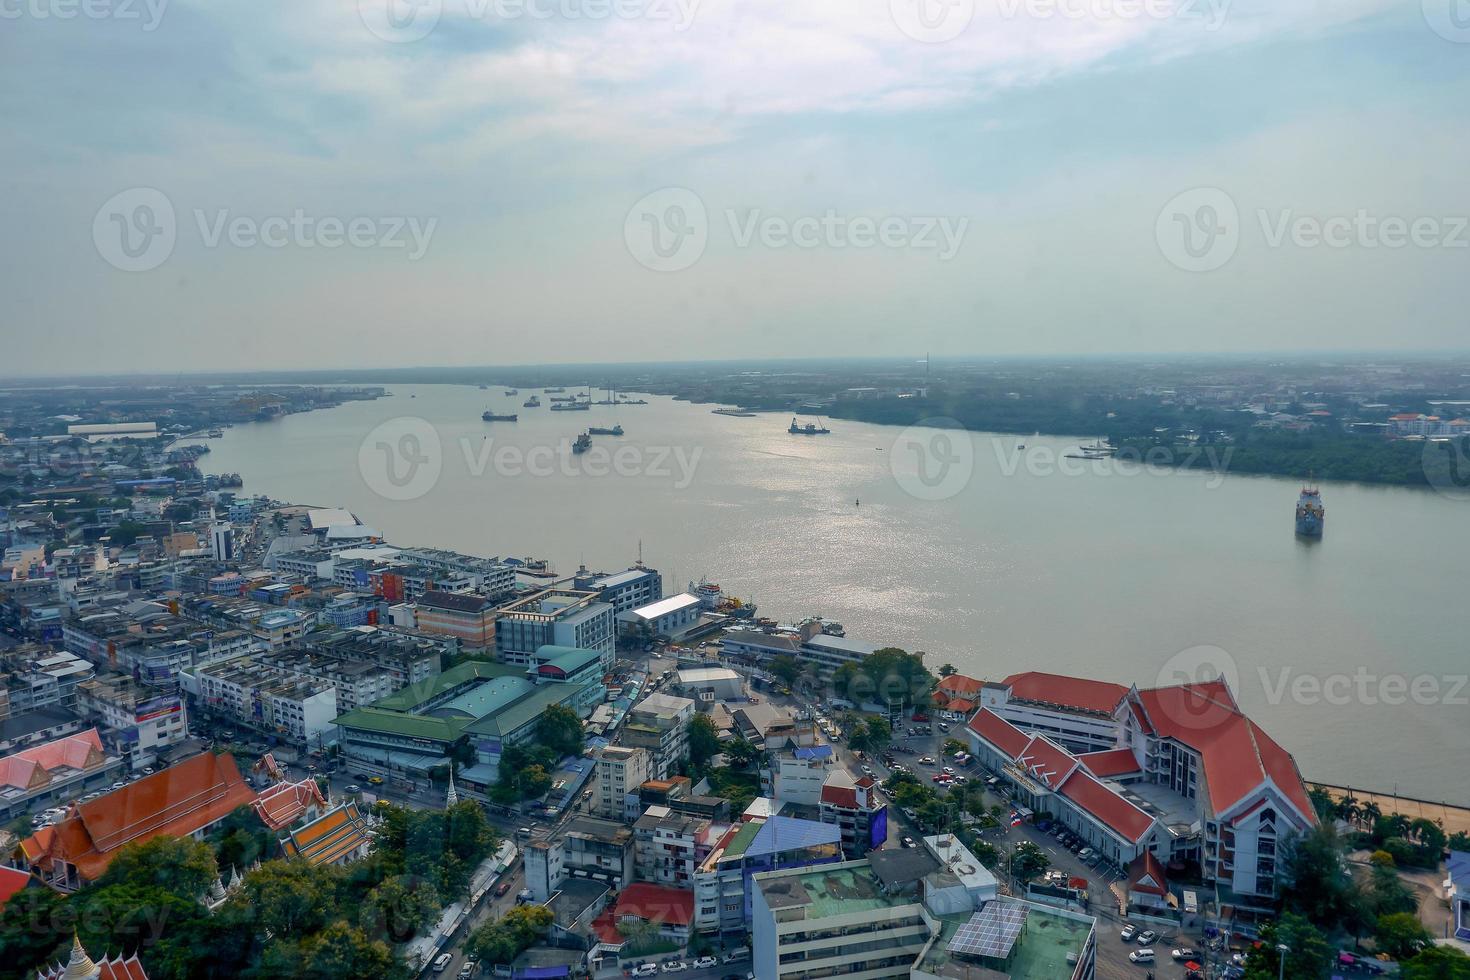 The landscape of the Chao Phraya River Estuary and the landscape of Samut Prakan City are the gateways to the seas of Thailand's merchant ships. photo